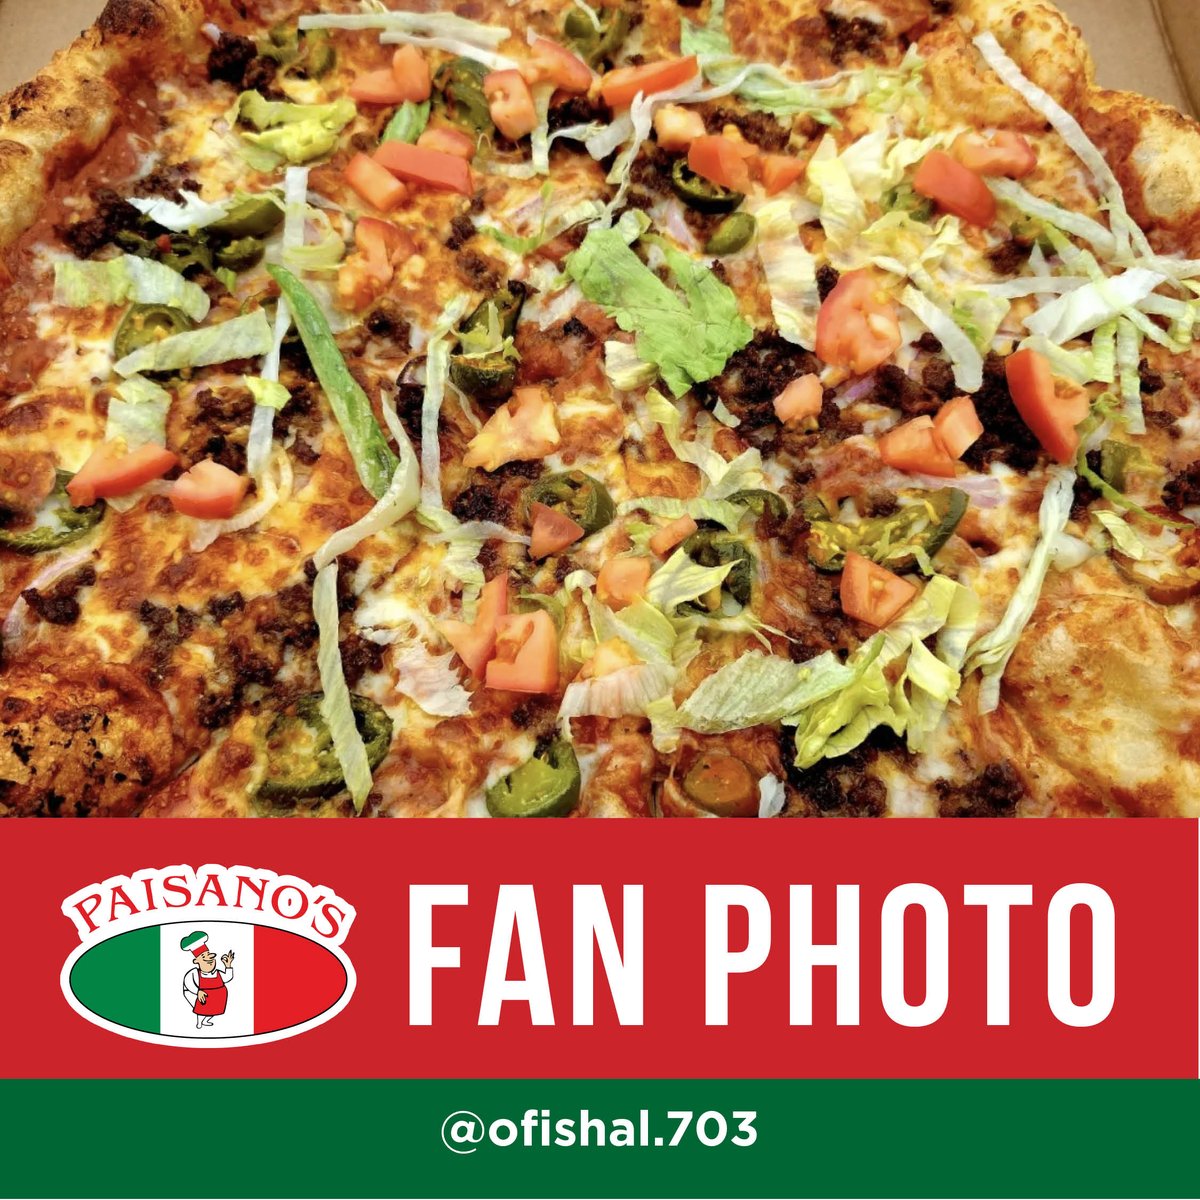 You can’t go wrong with a Paisano’s pie @ofishal.703. We are happy that you enjoyed our pizza. See you soon!🙌